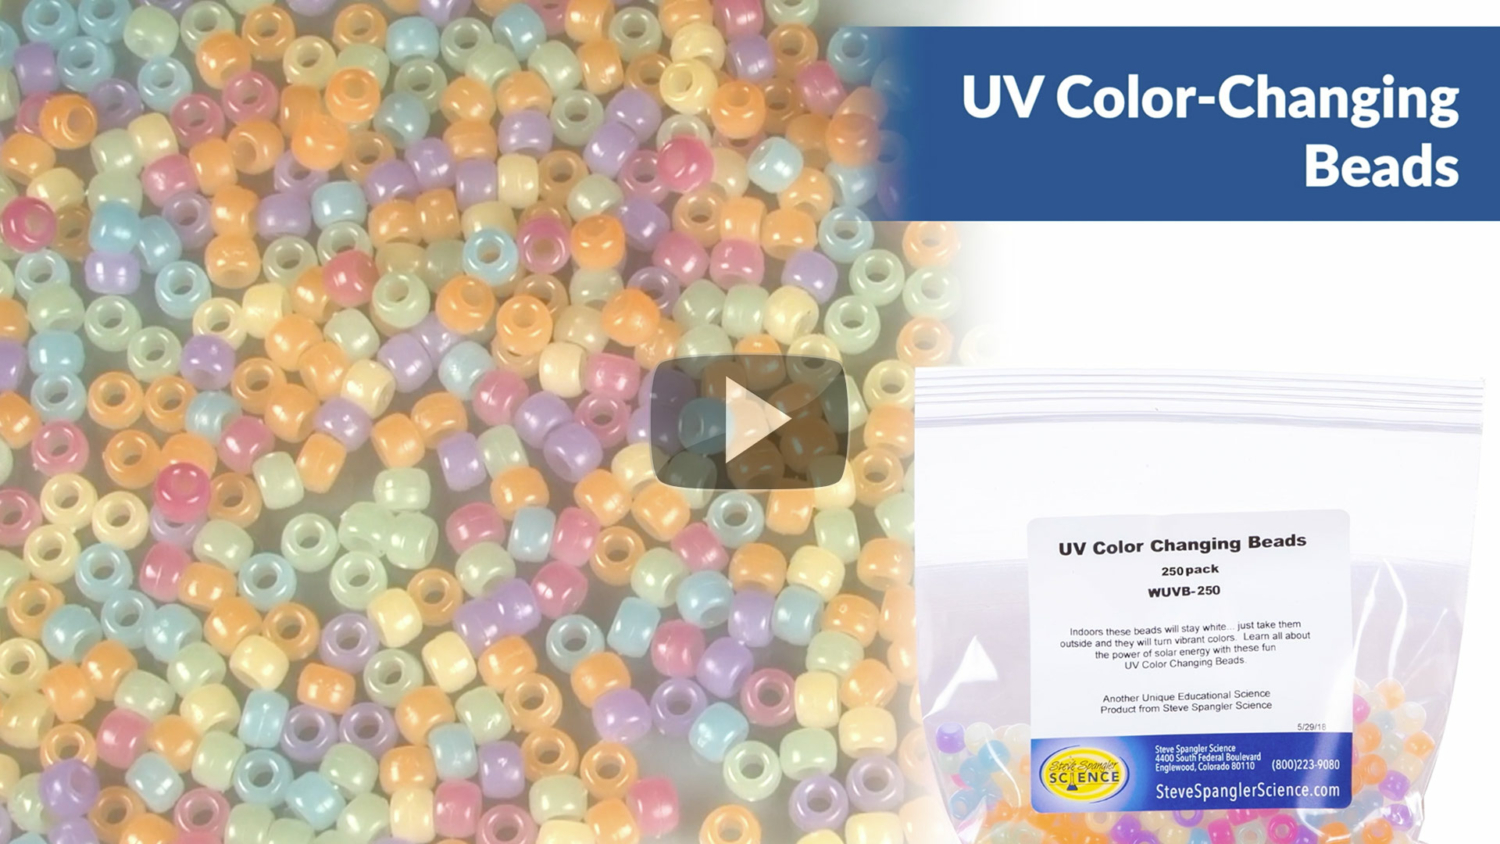 UV Color-Changing Beads